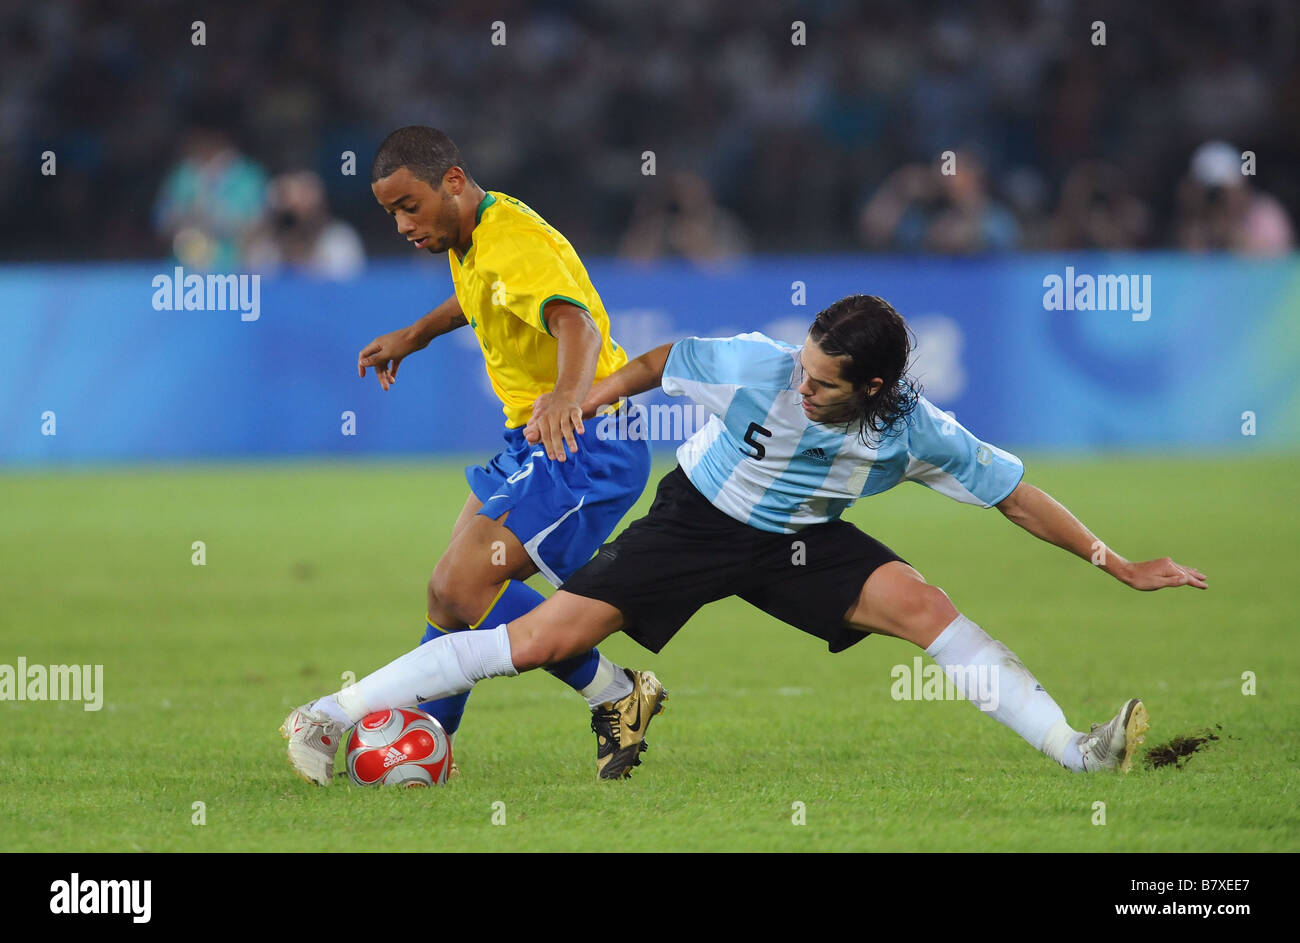 Marcelo BRA Fernando Gago ARG AUGUST 19 2008 Football Beijing 2008 Olympic Games Mens Football semi final match between Argentina and Brazil at Workers Stadium in Beijing China Photo by Atsushi Tomura AFLO SPORT 1035 Stock Photo